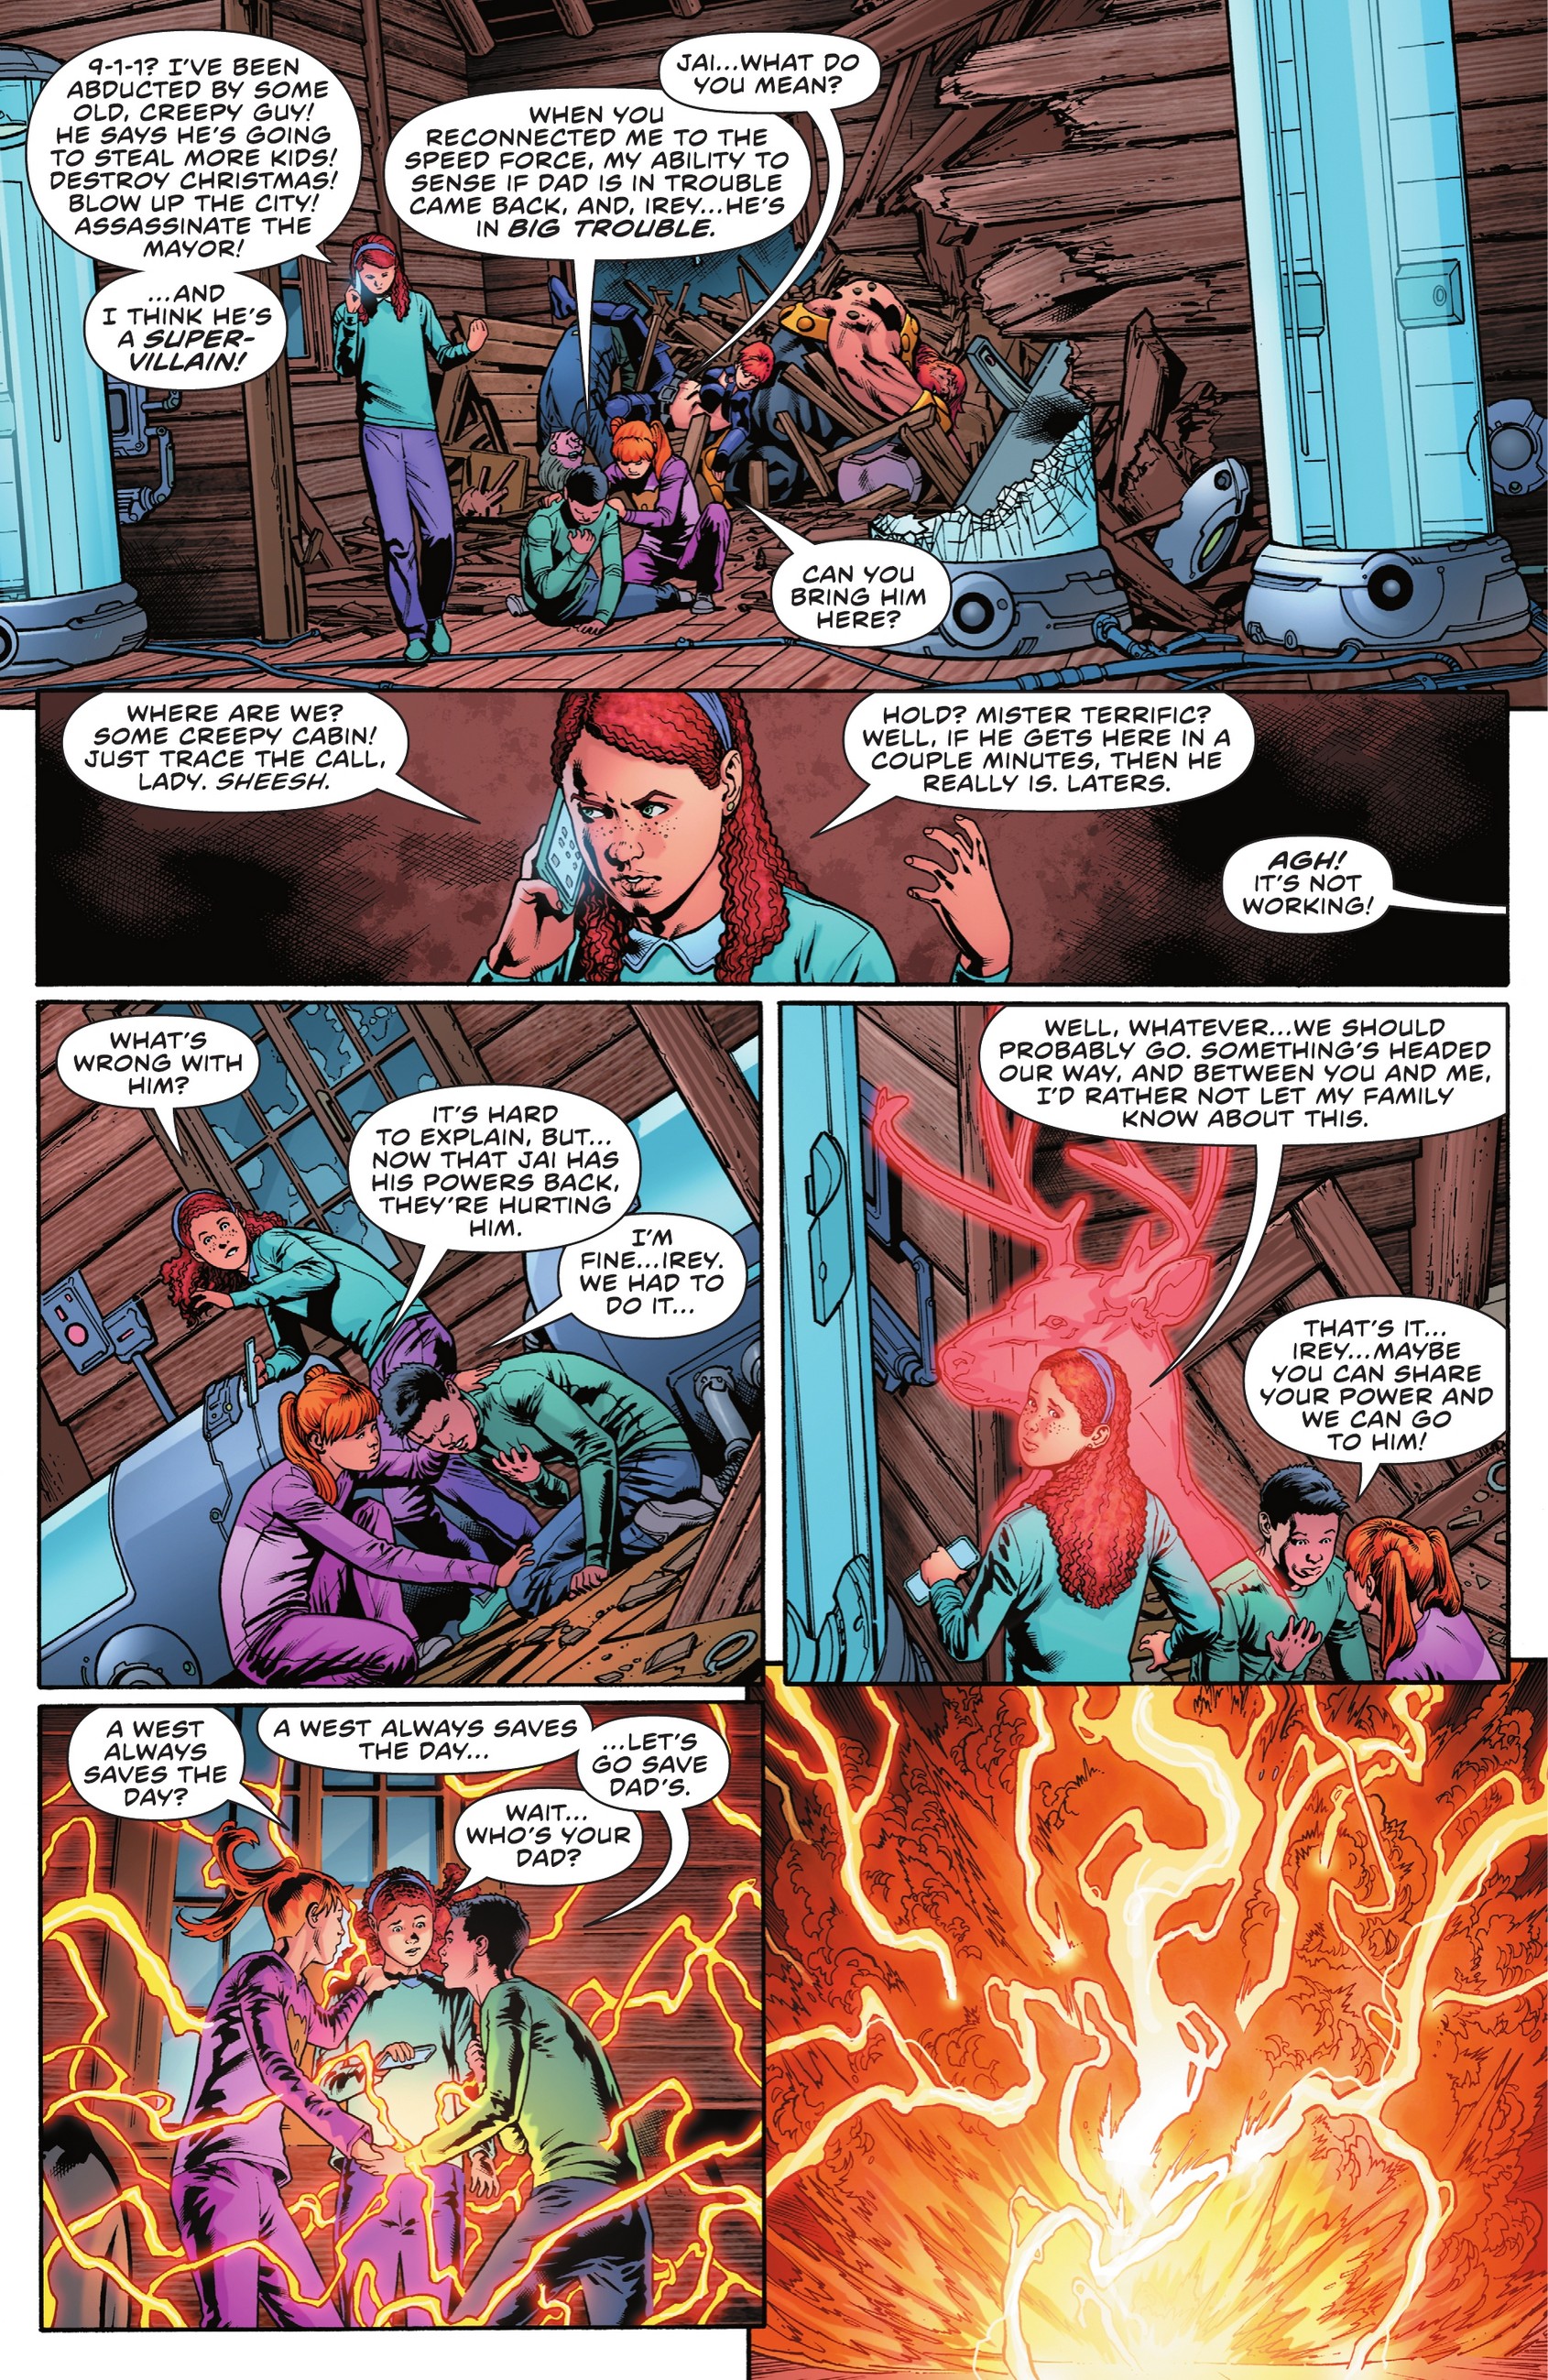 The Flash (2016-): Chapter 779 - Page 3